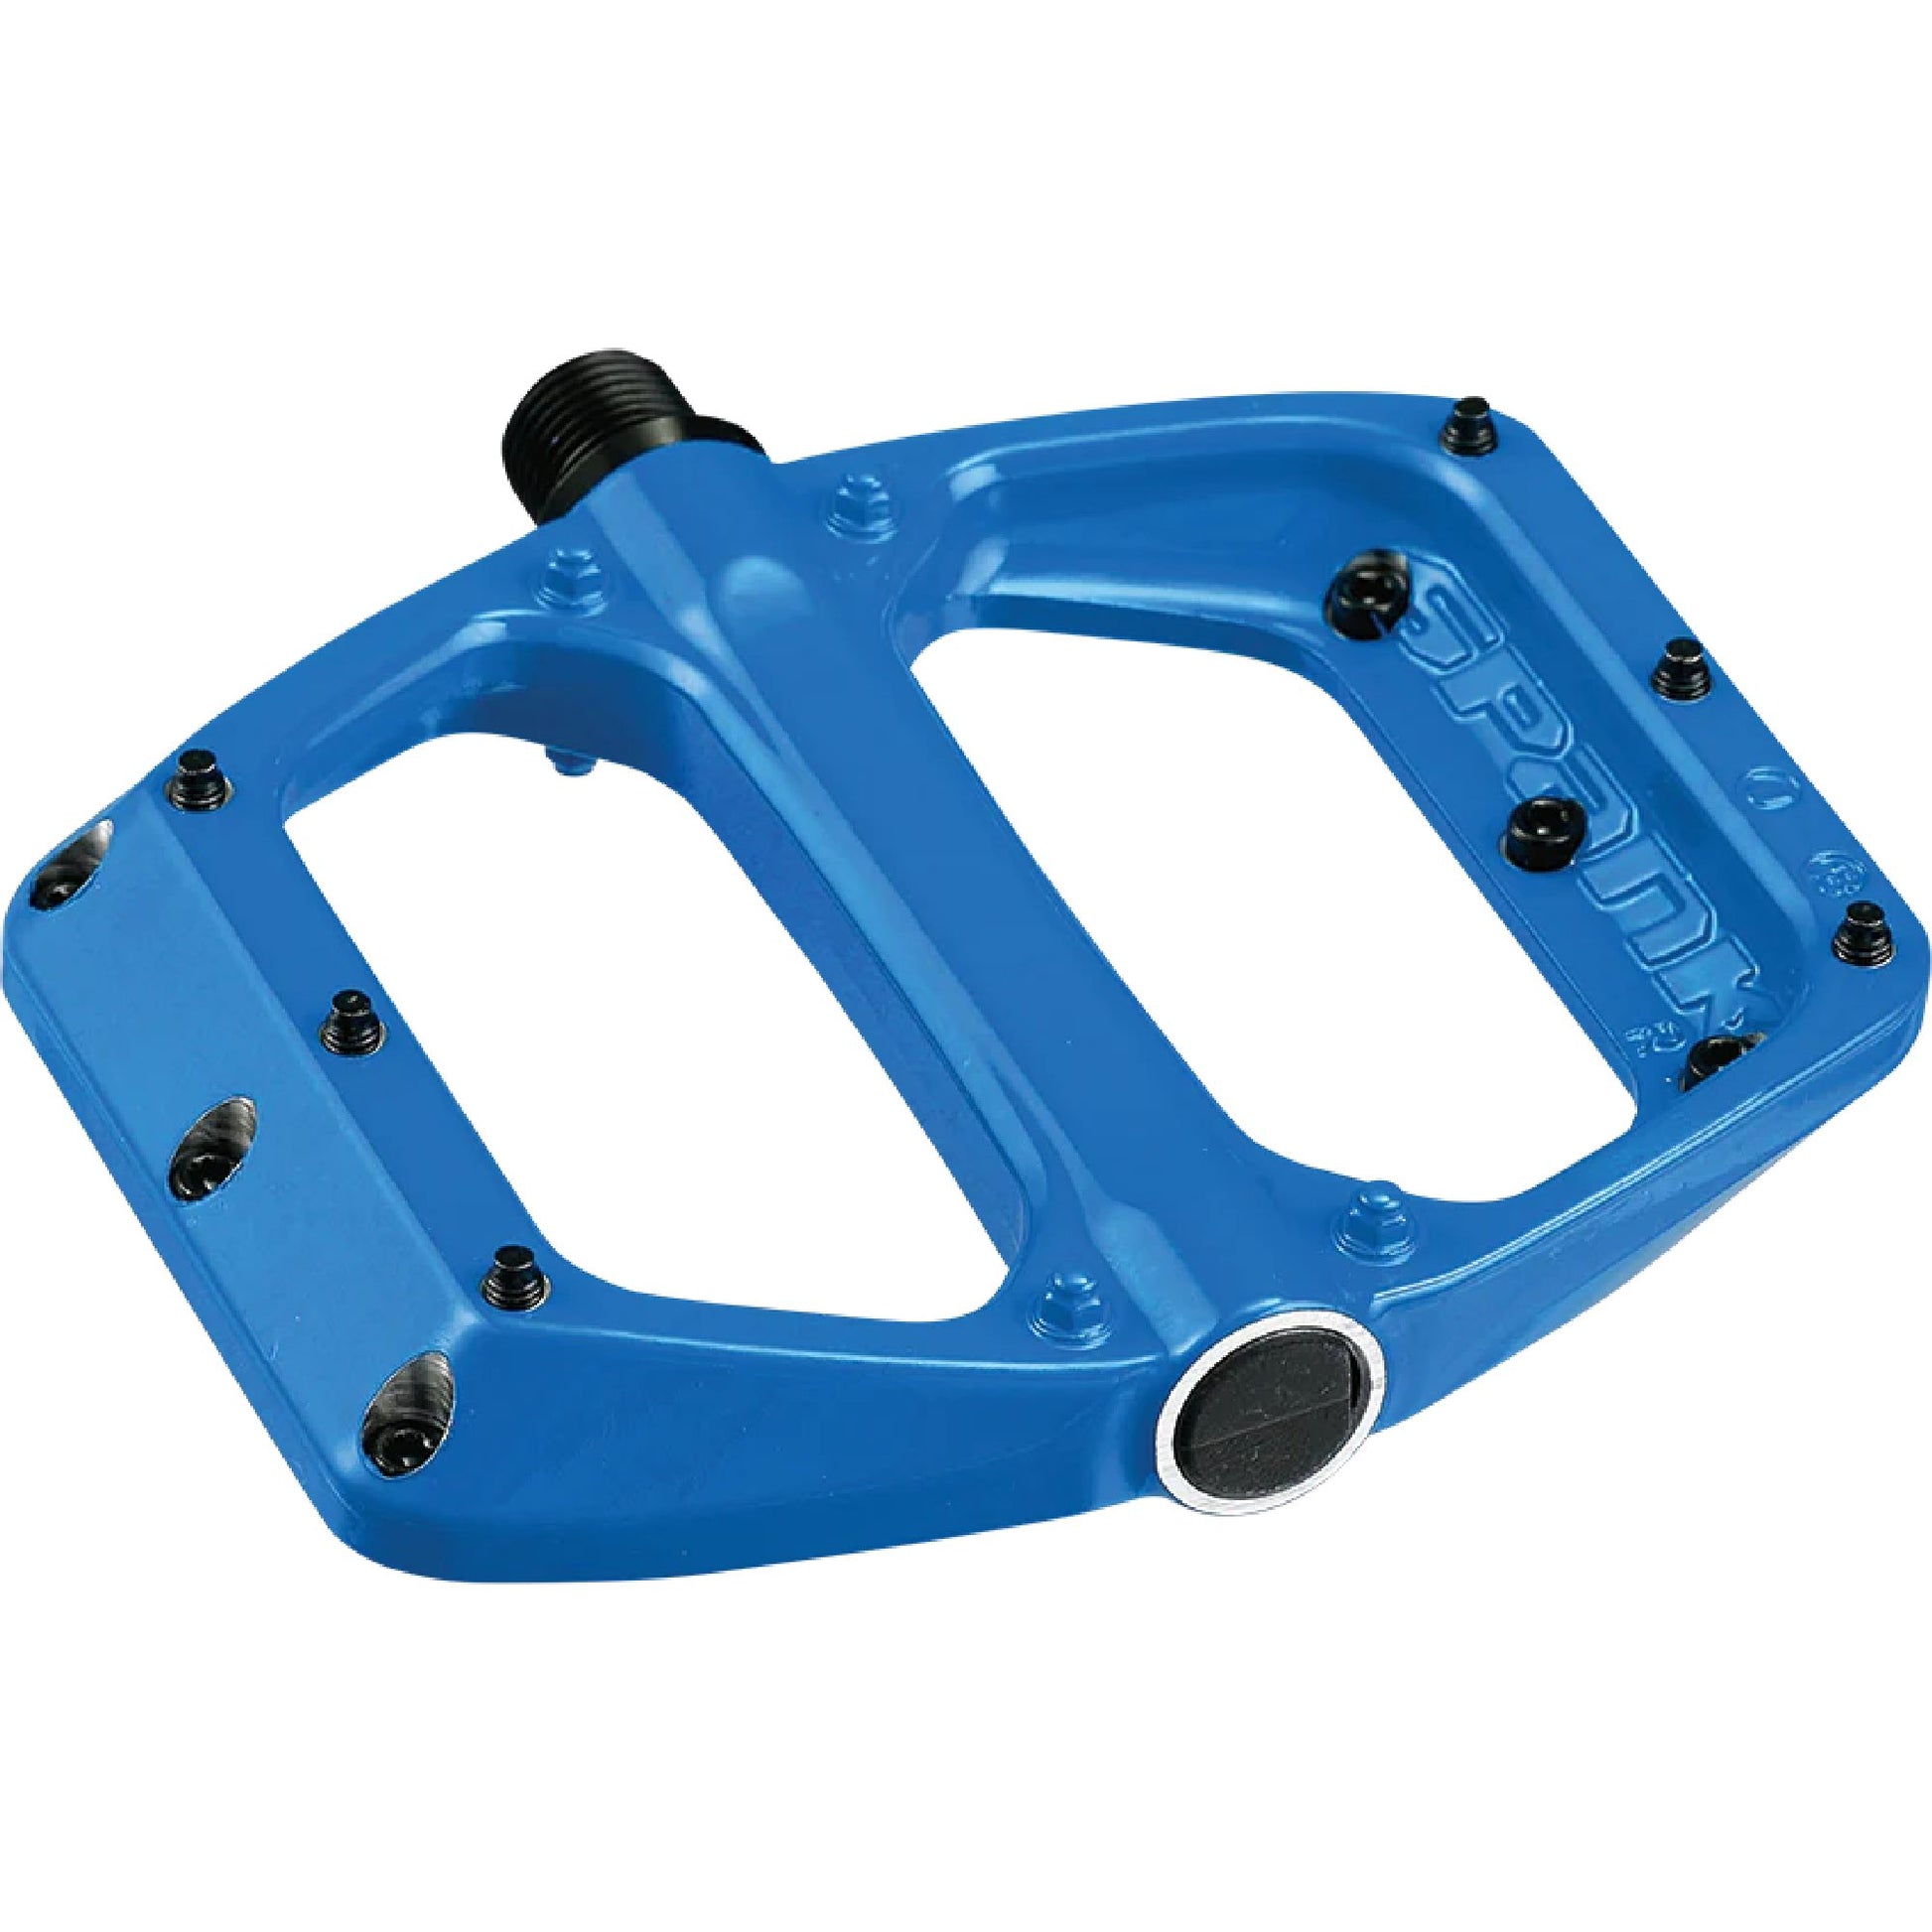 Spank Spoon DC Pedals Bright Blue 100x105mm Pedals